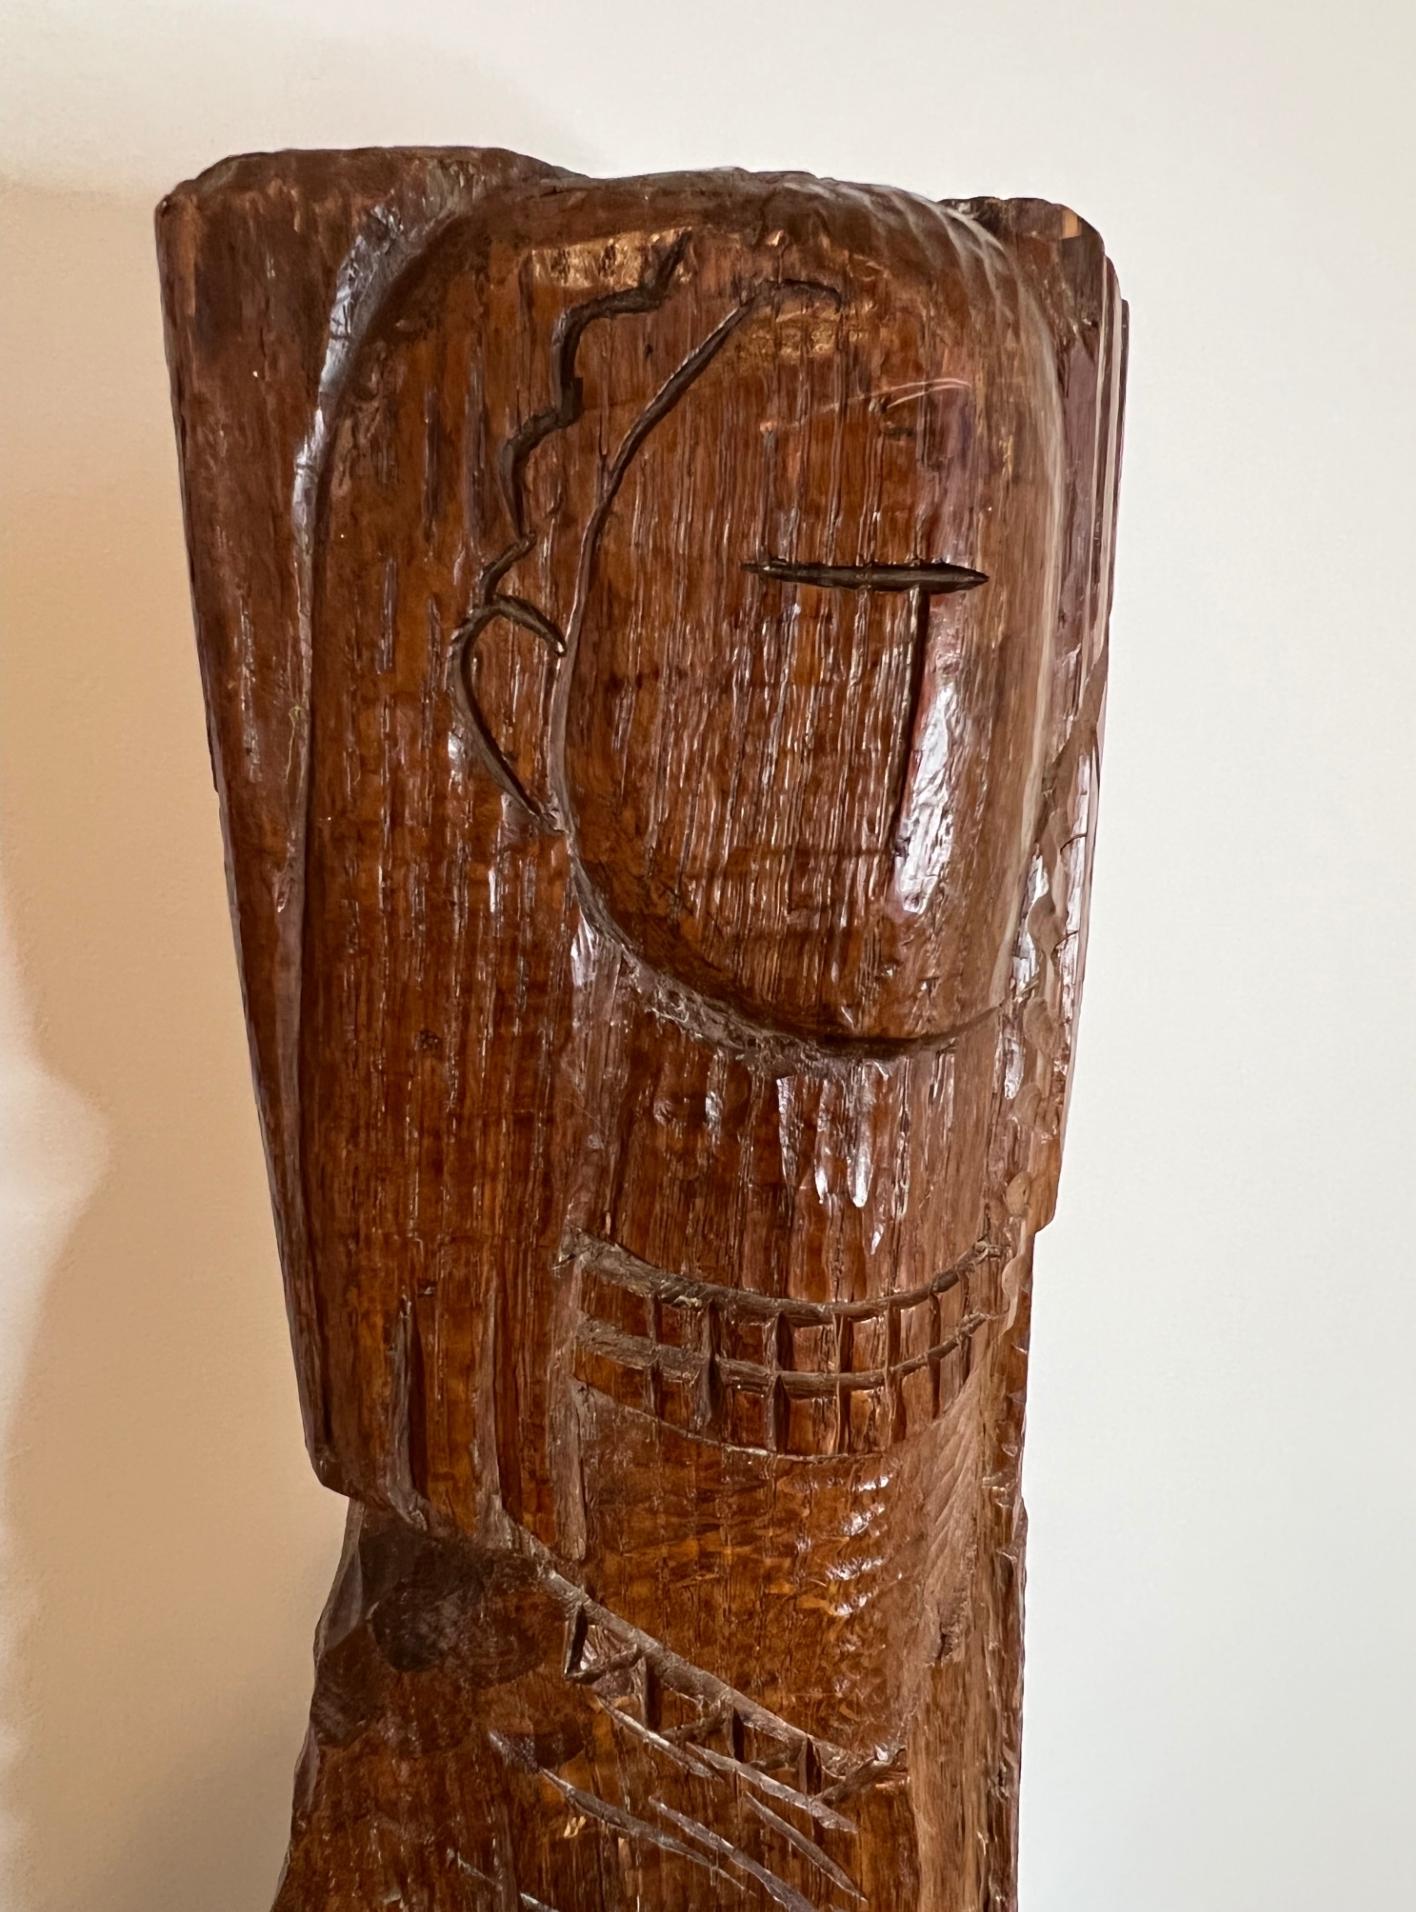 José De Creeft Female Totem Carved Wood Sculpture  In Good Condition For Sale In Forney, TX